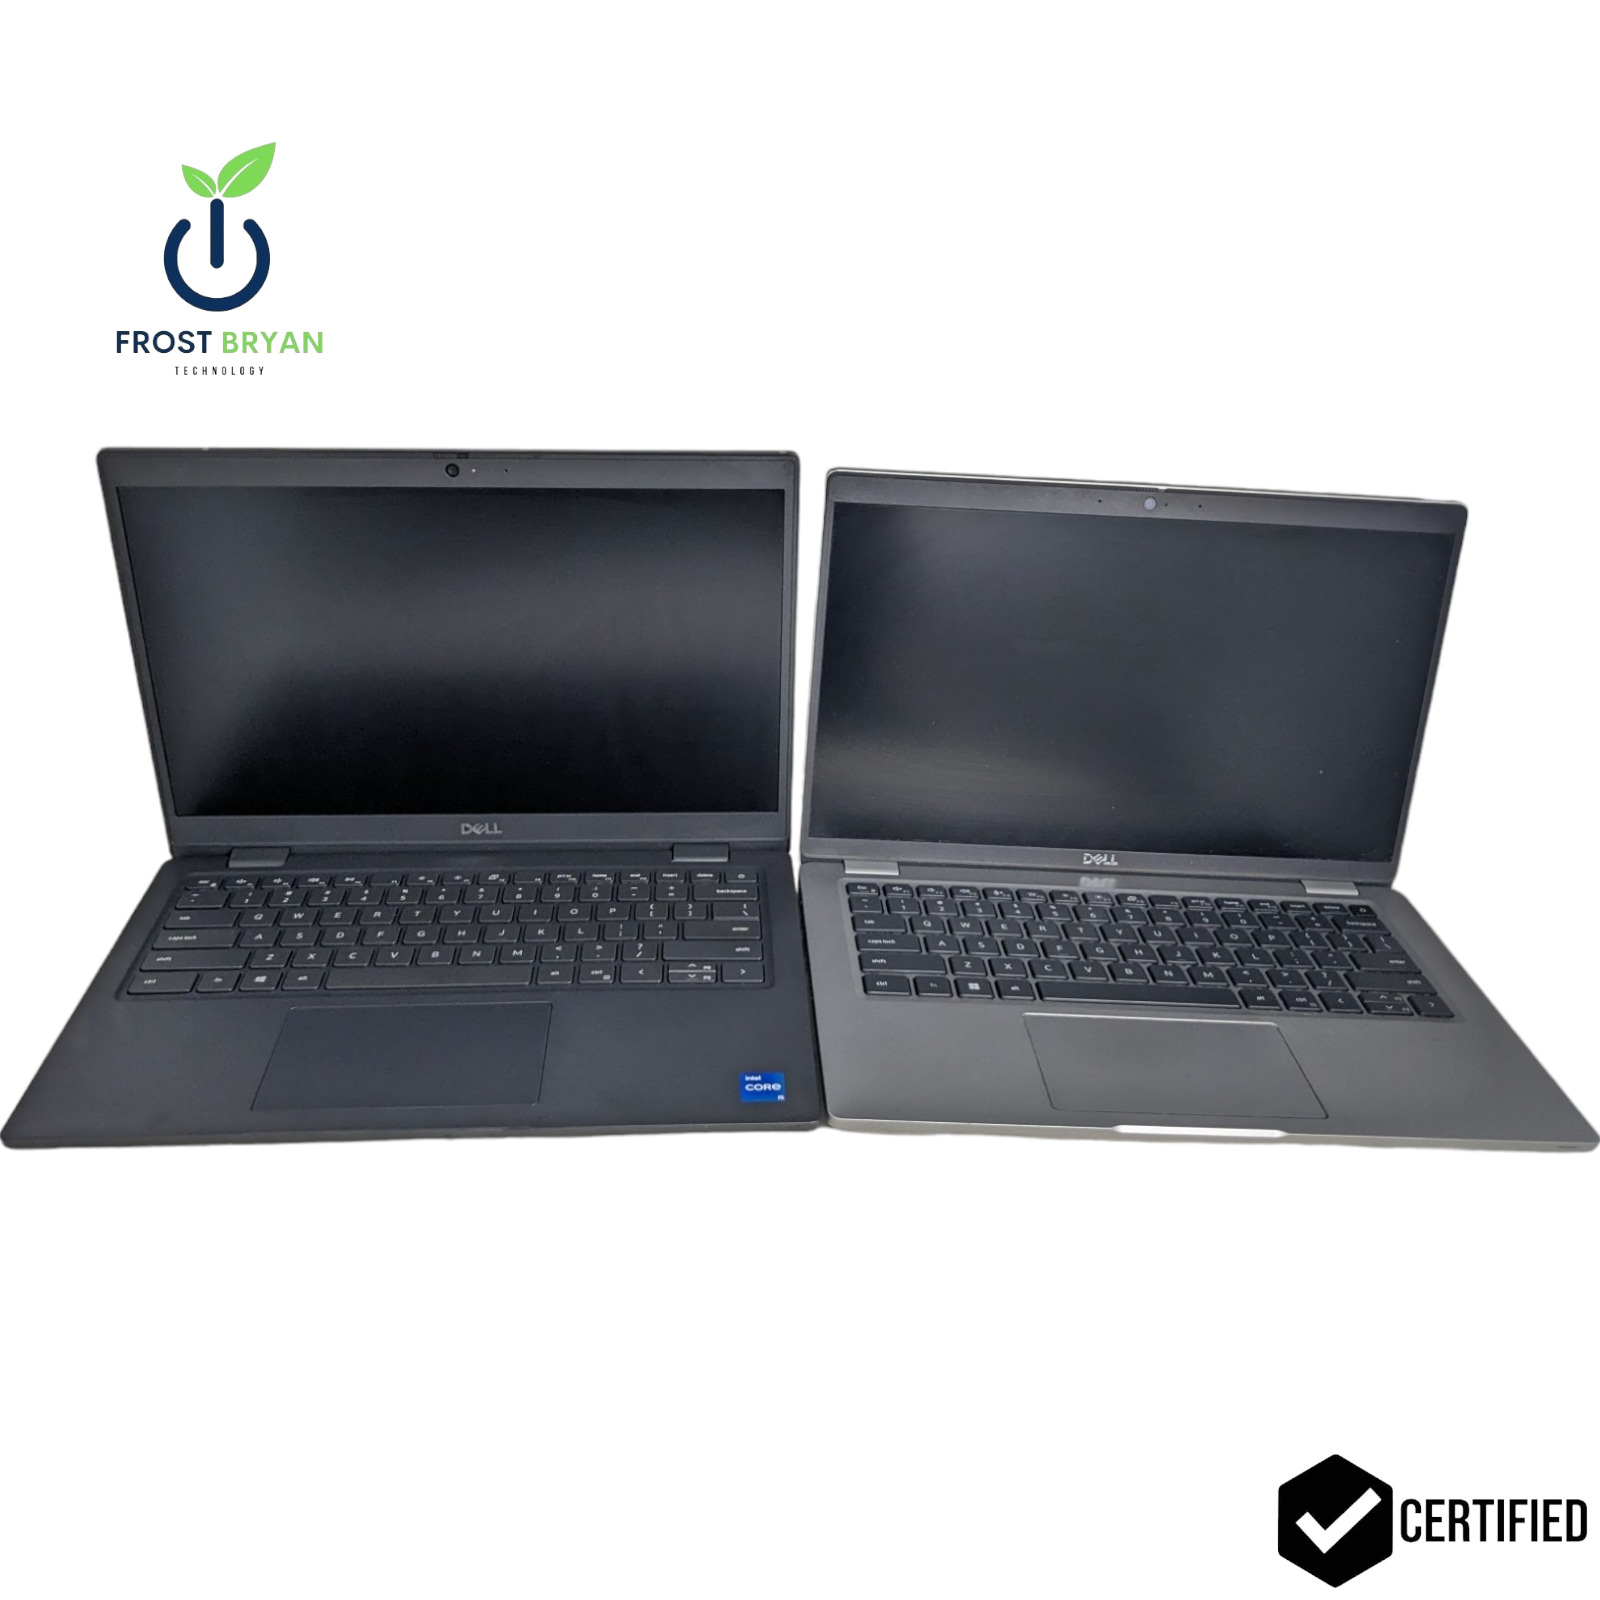 Lot of 2 x Dell Latitude 3420/5420 i5 11th Gen, 8GB RAM, NO HDD/BATTERY/OS